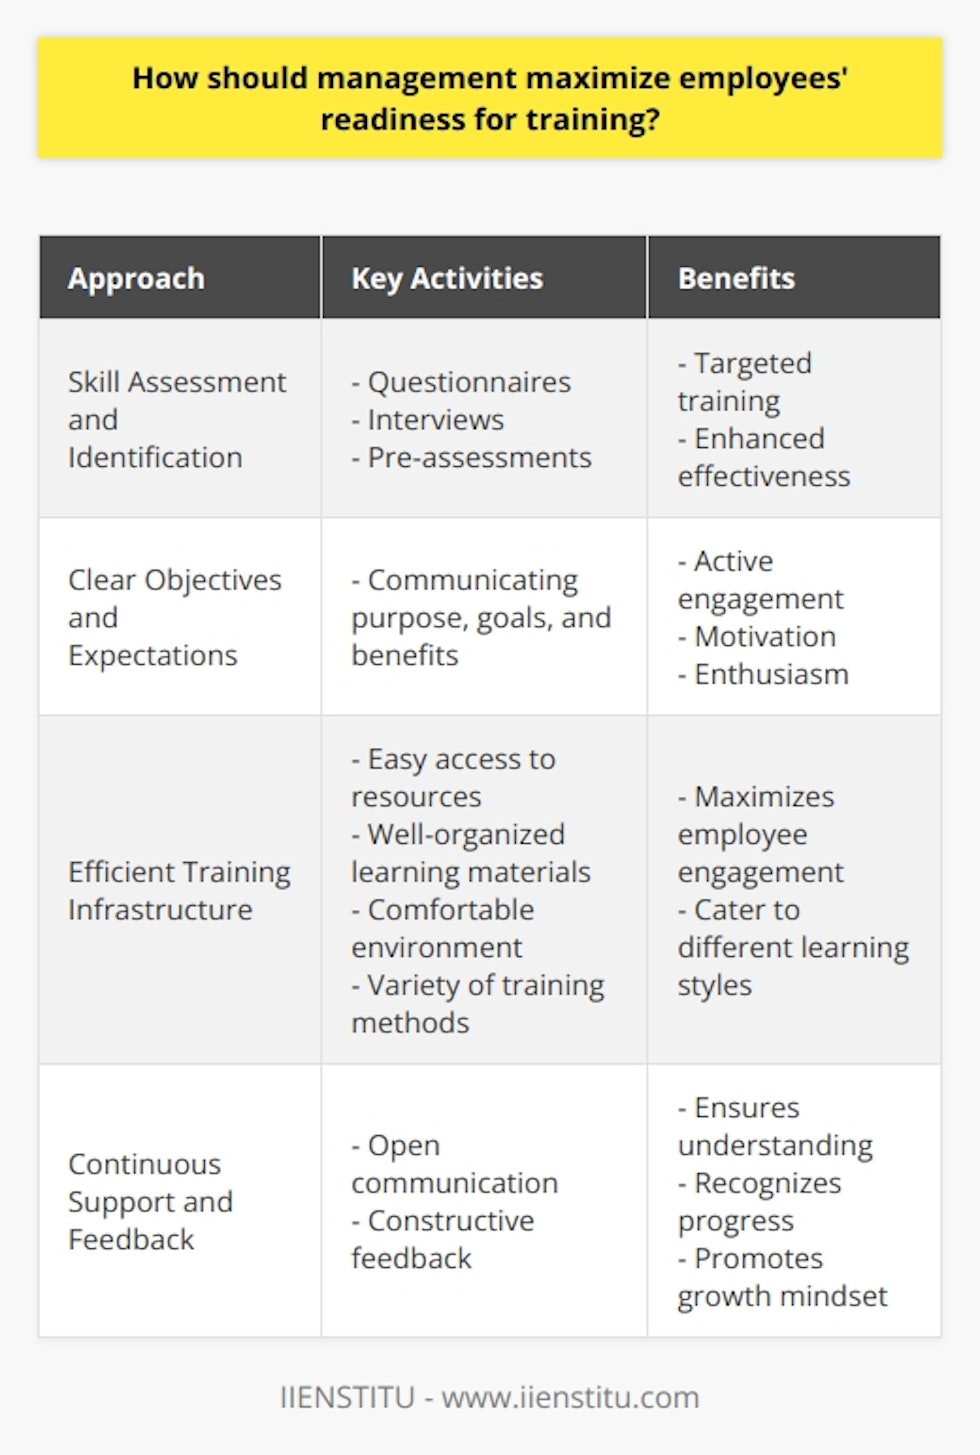 Maximizing employee readiness for training is crucial in ensuring the success of the training program and ultimately, the overall performance of the organization. To achieve this, management should adopt a comprehensive and strategic approach that involves skill assessment and identification, setting clear objectives and expectations, establishing an efficient training infrastructure, and providing continuous support and feedback.Skill assessment and identification are essential in understanding employees' current skills and knowledge. This can be done through questionnaires, interviews, or pre-assessments. By gathering valuable insights, management can identify employees who require further training or assistance. This enables targeted and more effective training programs.Setting clear objectives and expectations is another crucial aspect of maximizing employee readiness for training. By communicating the purpose, goals, and benefits of the training program, management helps employees recognize the significance and relevance of the training to their job responsibilities and career development. This promotes active engagement, motivation, and enthusiasm.Establishing an efficient training infrastructure is vital to ensure employees' readiness for training. This includes providing easy access to training resources, well-organized learning materials, and a comfortable learning environment. Employing a variety of training methods caters to different learning styles and maximizes employee engagement.Continuous support and feedback are important throughout the training program. Open communication allows employees to voice their concerns or questions, ensuring their understanding and active participation. Offering constructive feedback during and after the training sessions promotes a growth-oriented mindset and recognizes employees' progress. This significantly contributes to their overall readiness for training.In conclusion, maximizing employees' readiness for training requires a careful and strategic approach. By assessing employees' skills, setting clear objectives, establishing an efficient training infrastructure, and providing continuous support and feedback, management can optimize employee engagement and readiness. This, in turn, enhances the success of the training program and positively impacts the organization's overall performance.